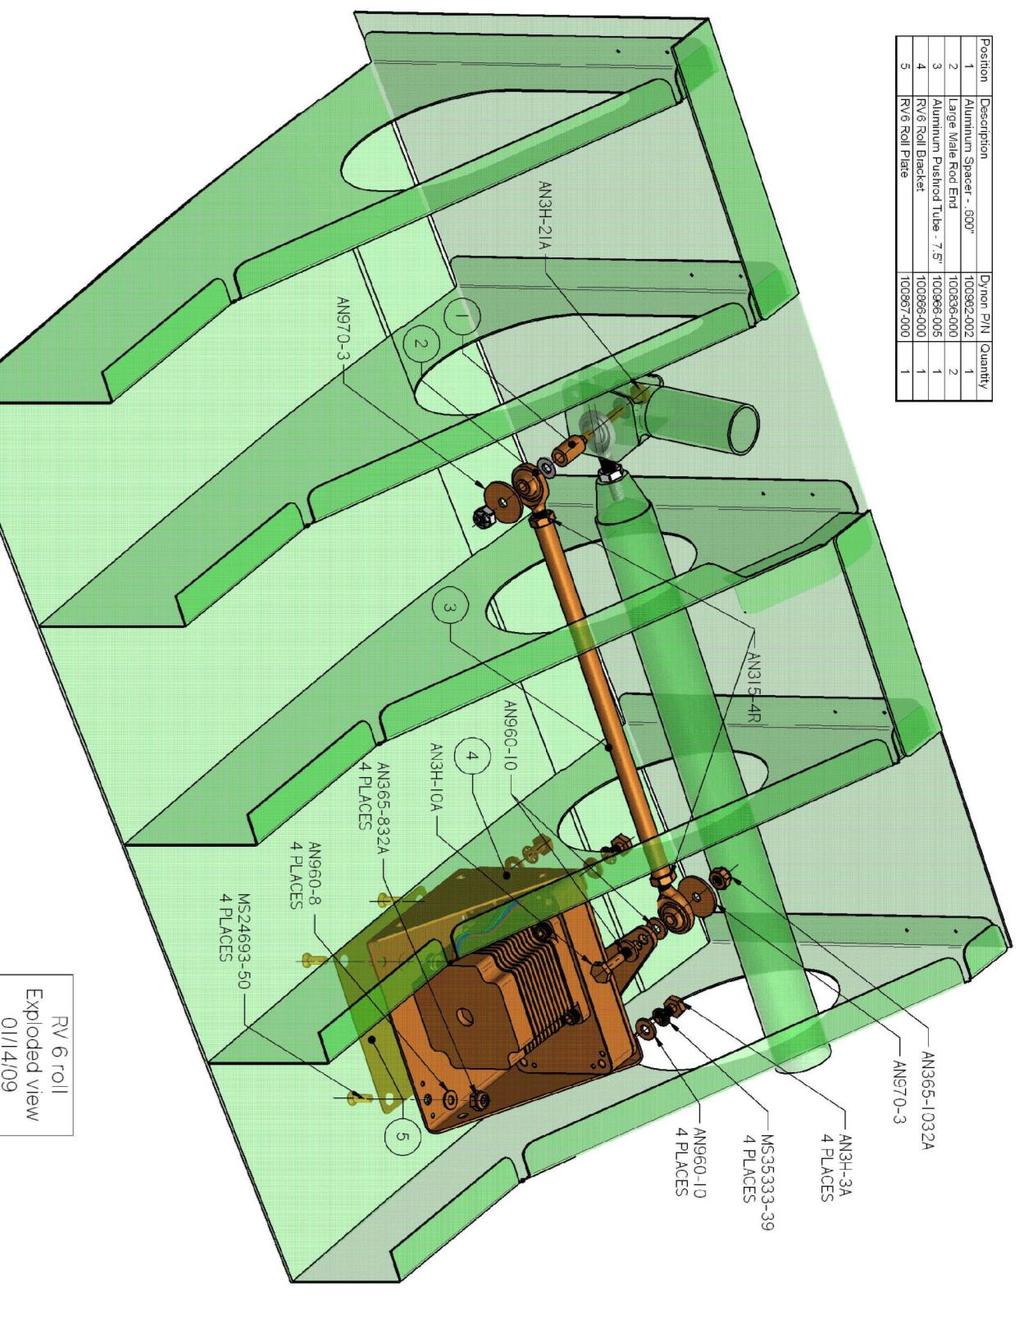 Mounting drawings The following pages provide detailed views of the mounting